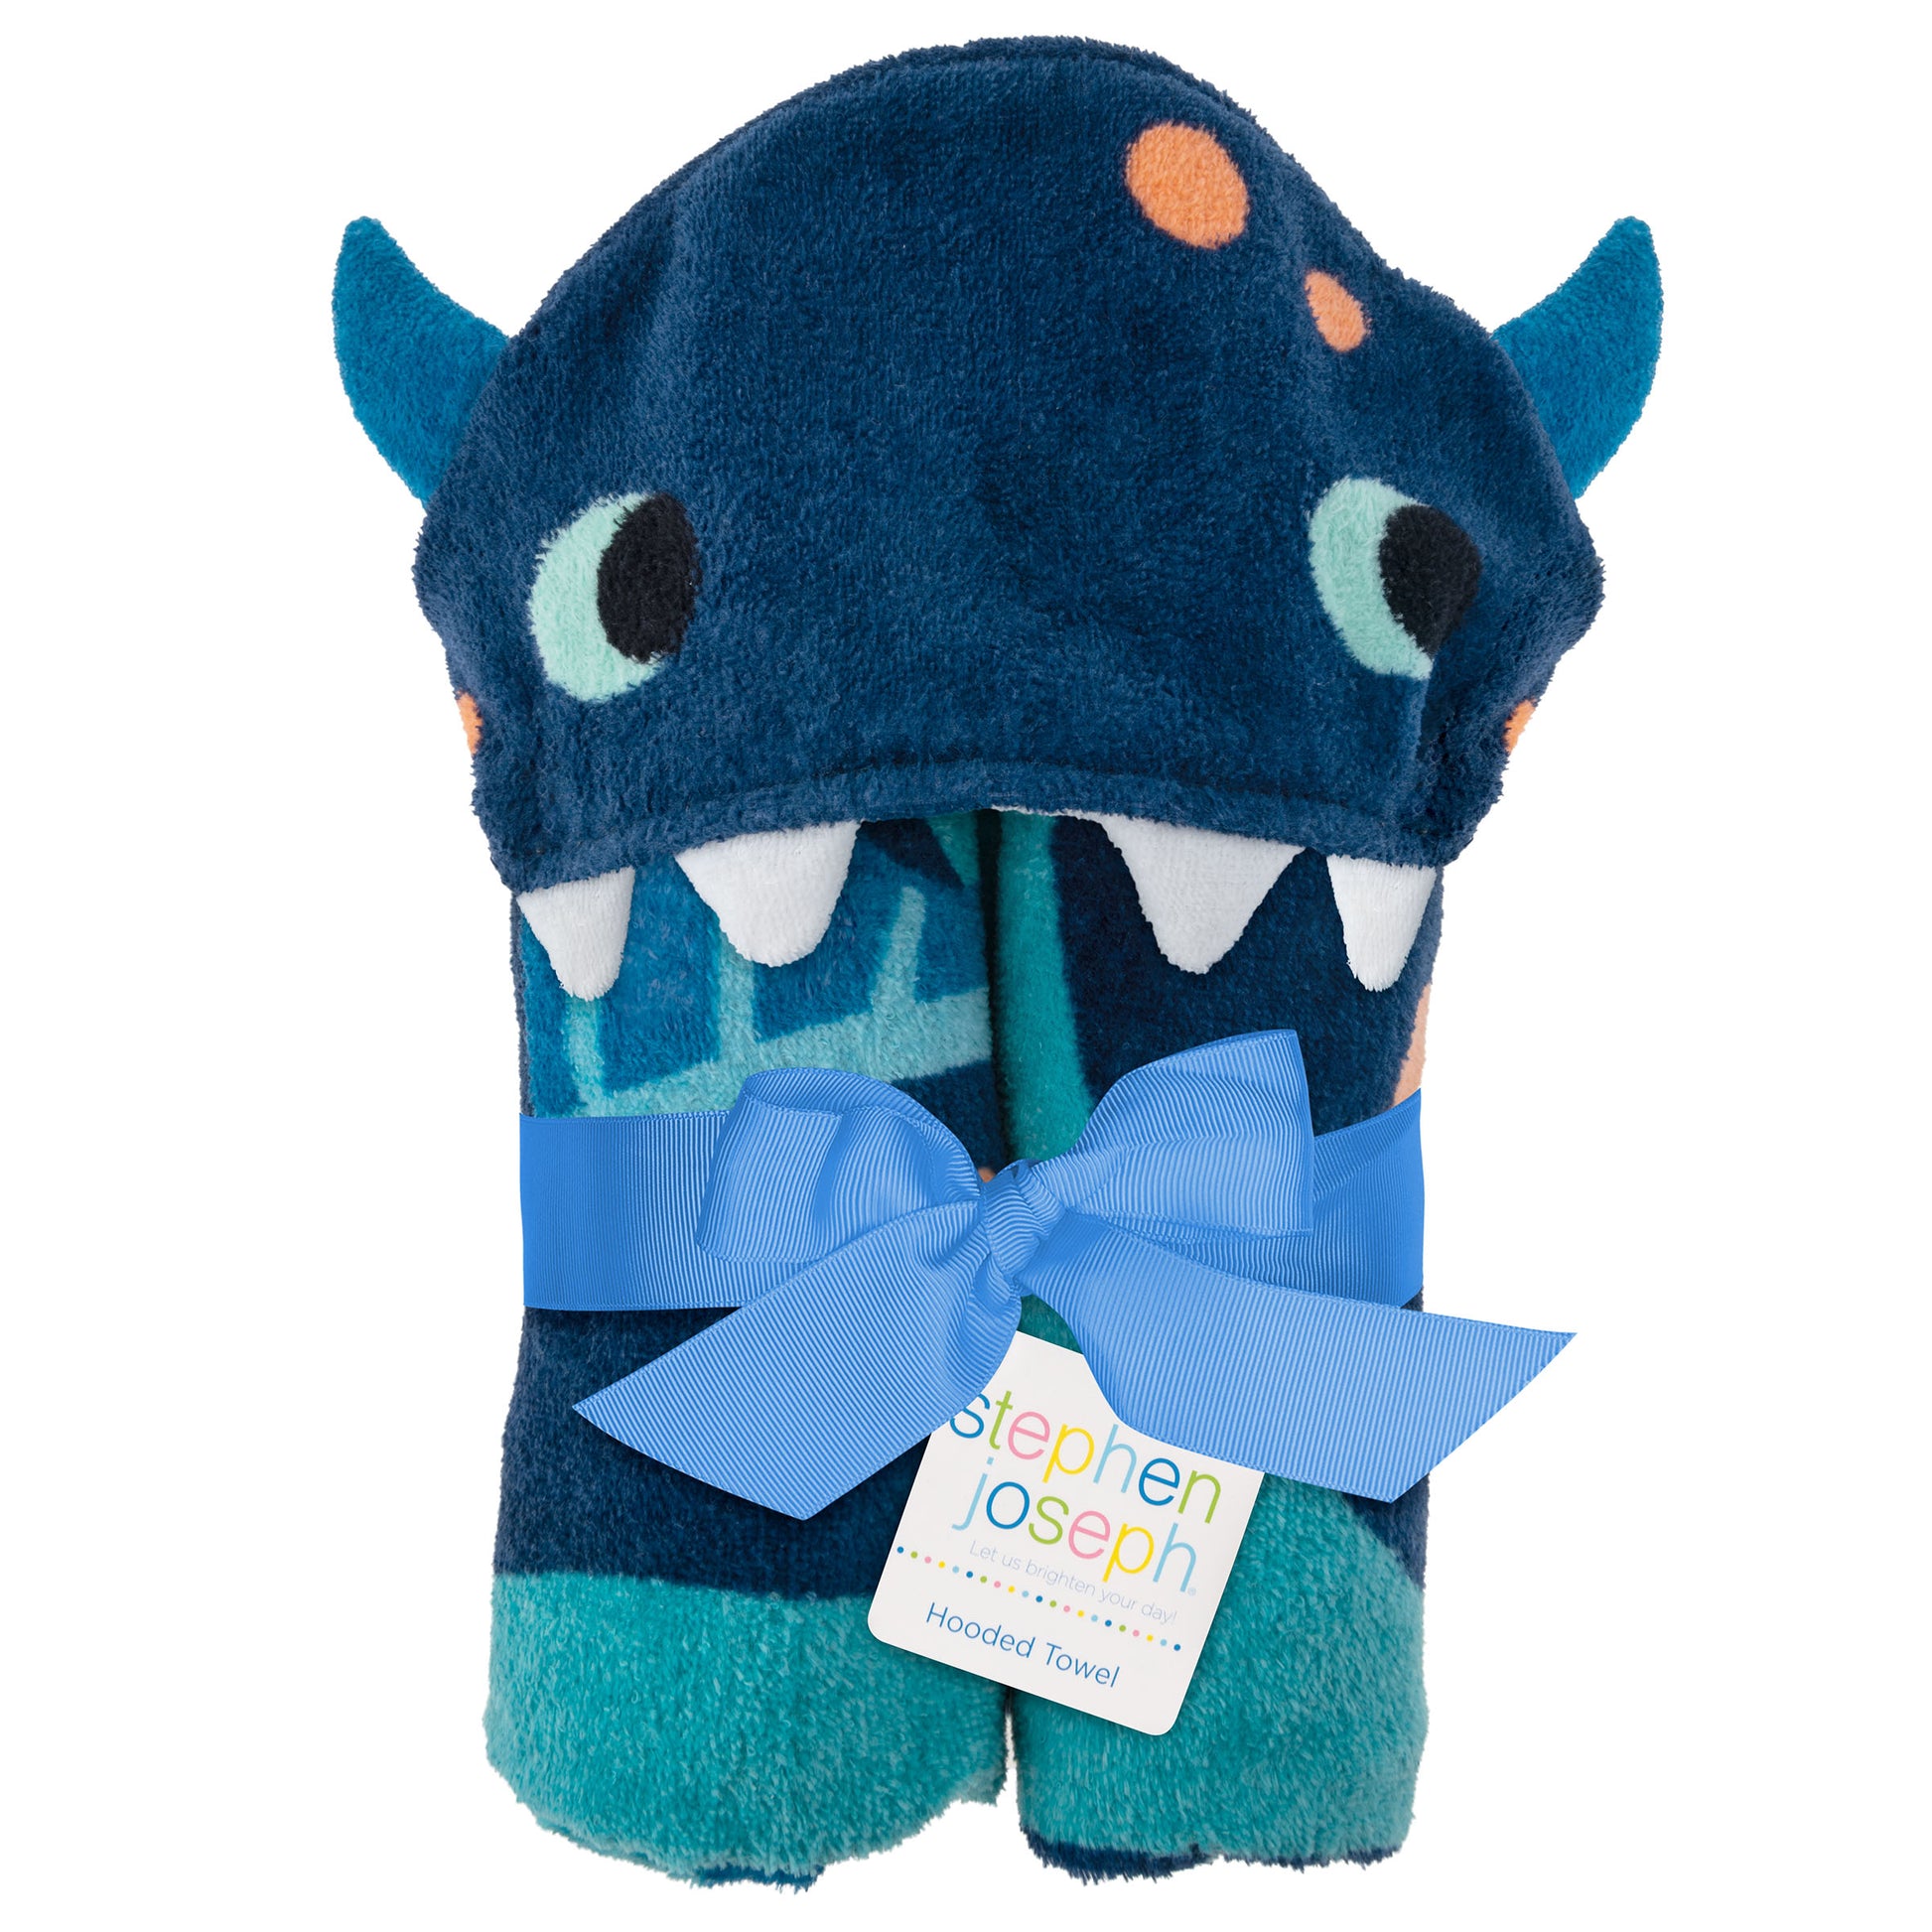 Sea Monster Hooded Towel with Personalization